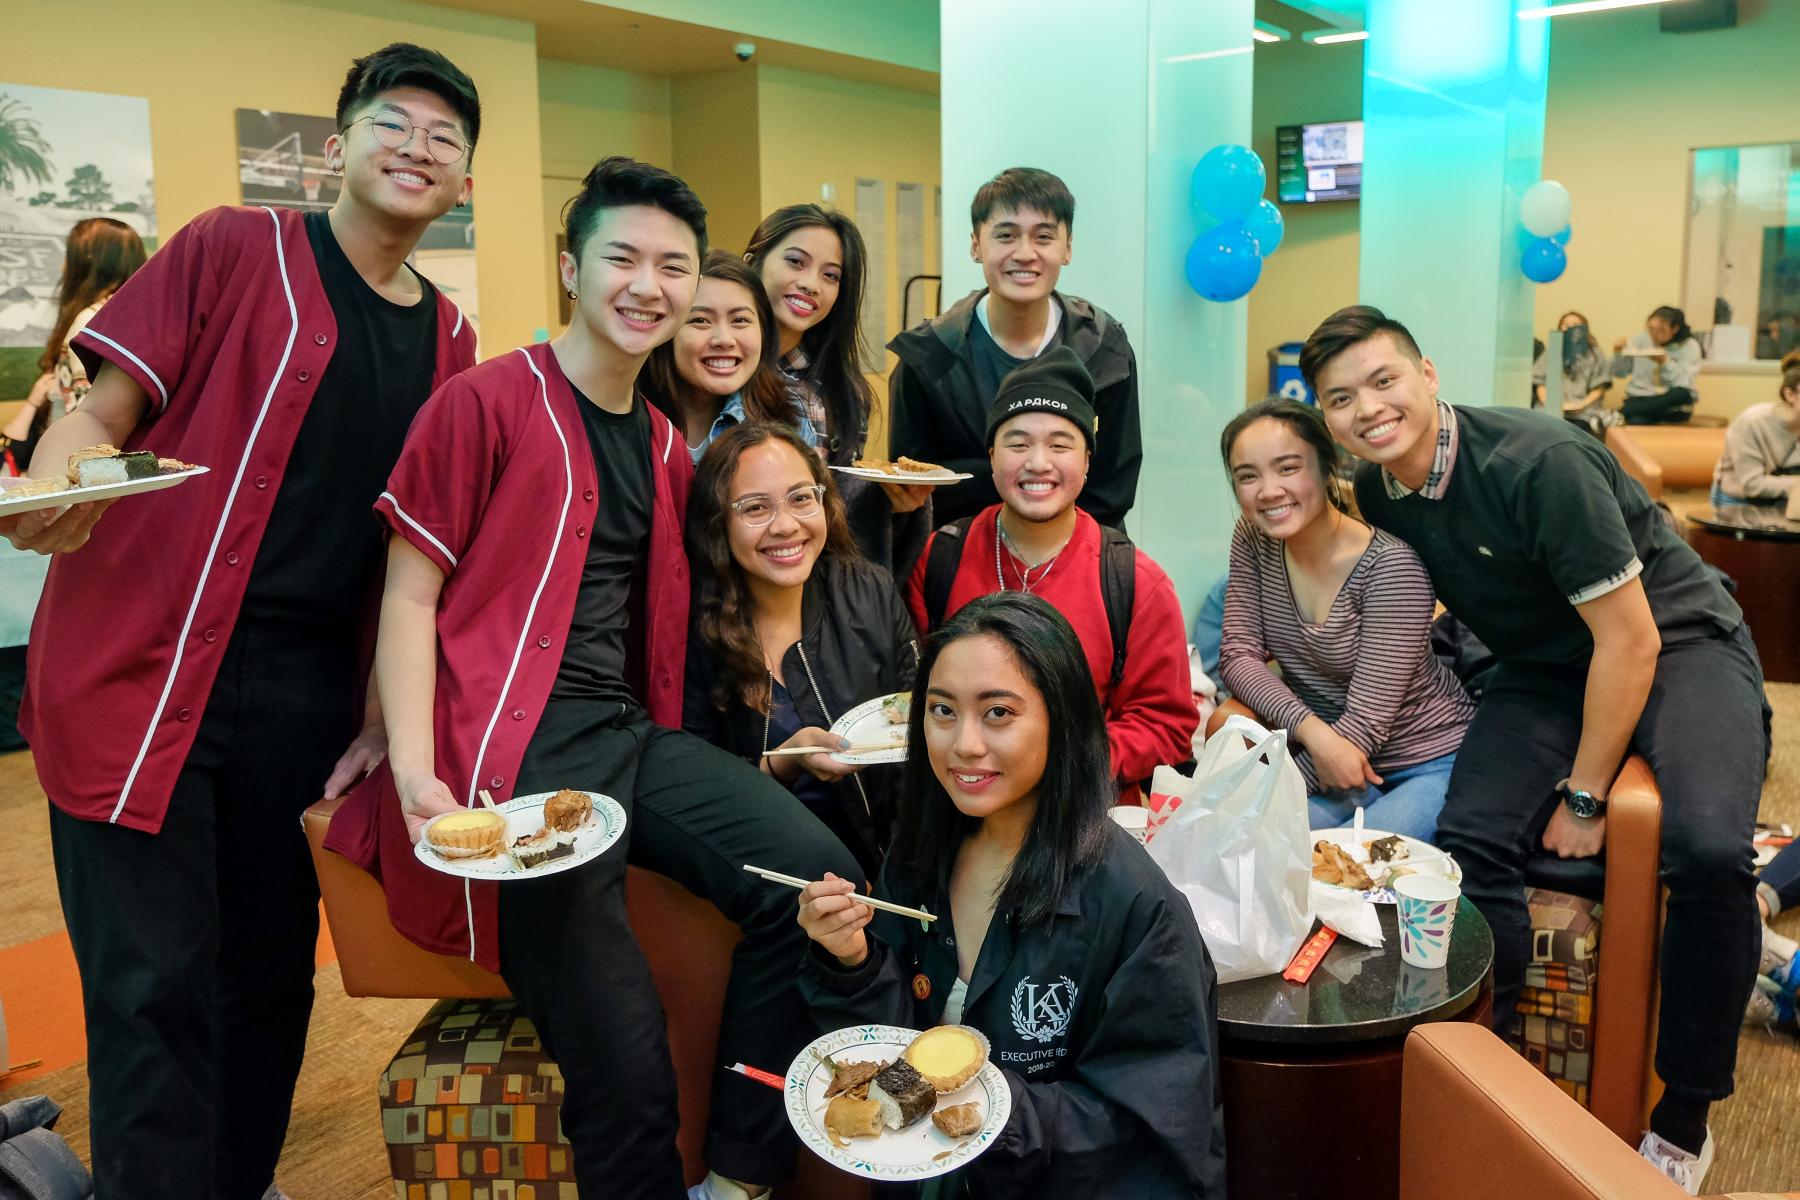 Group of International Students at an event